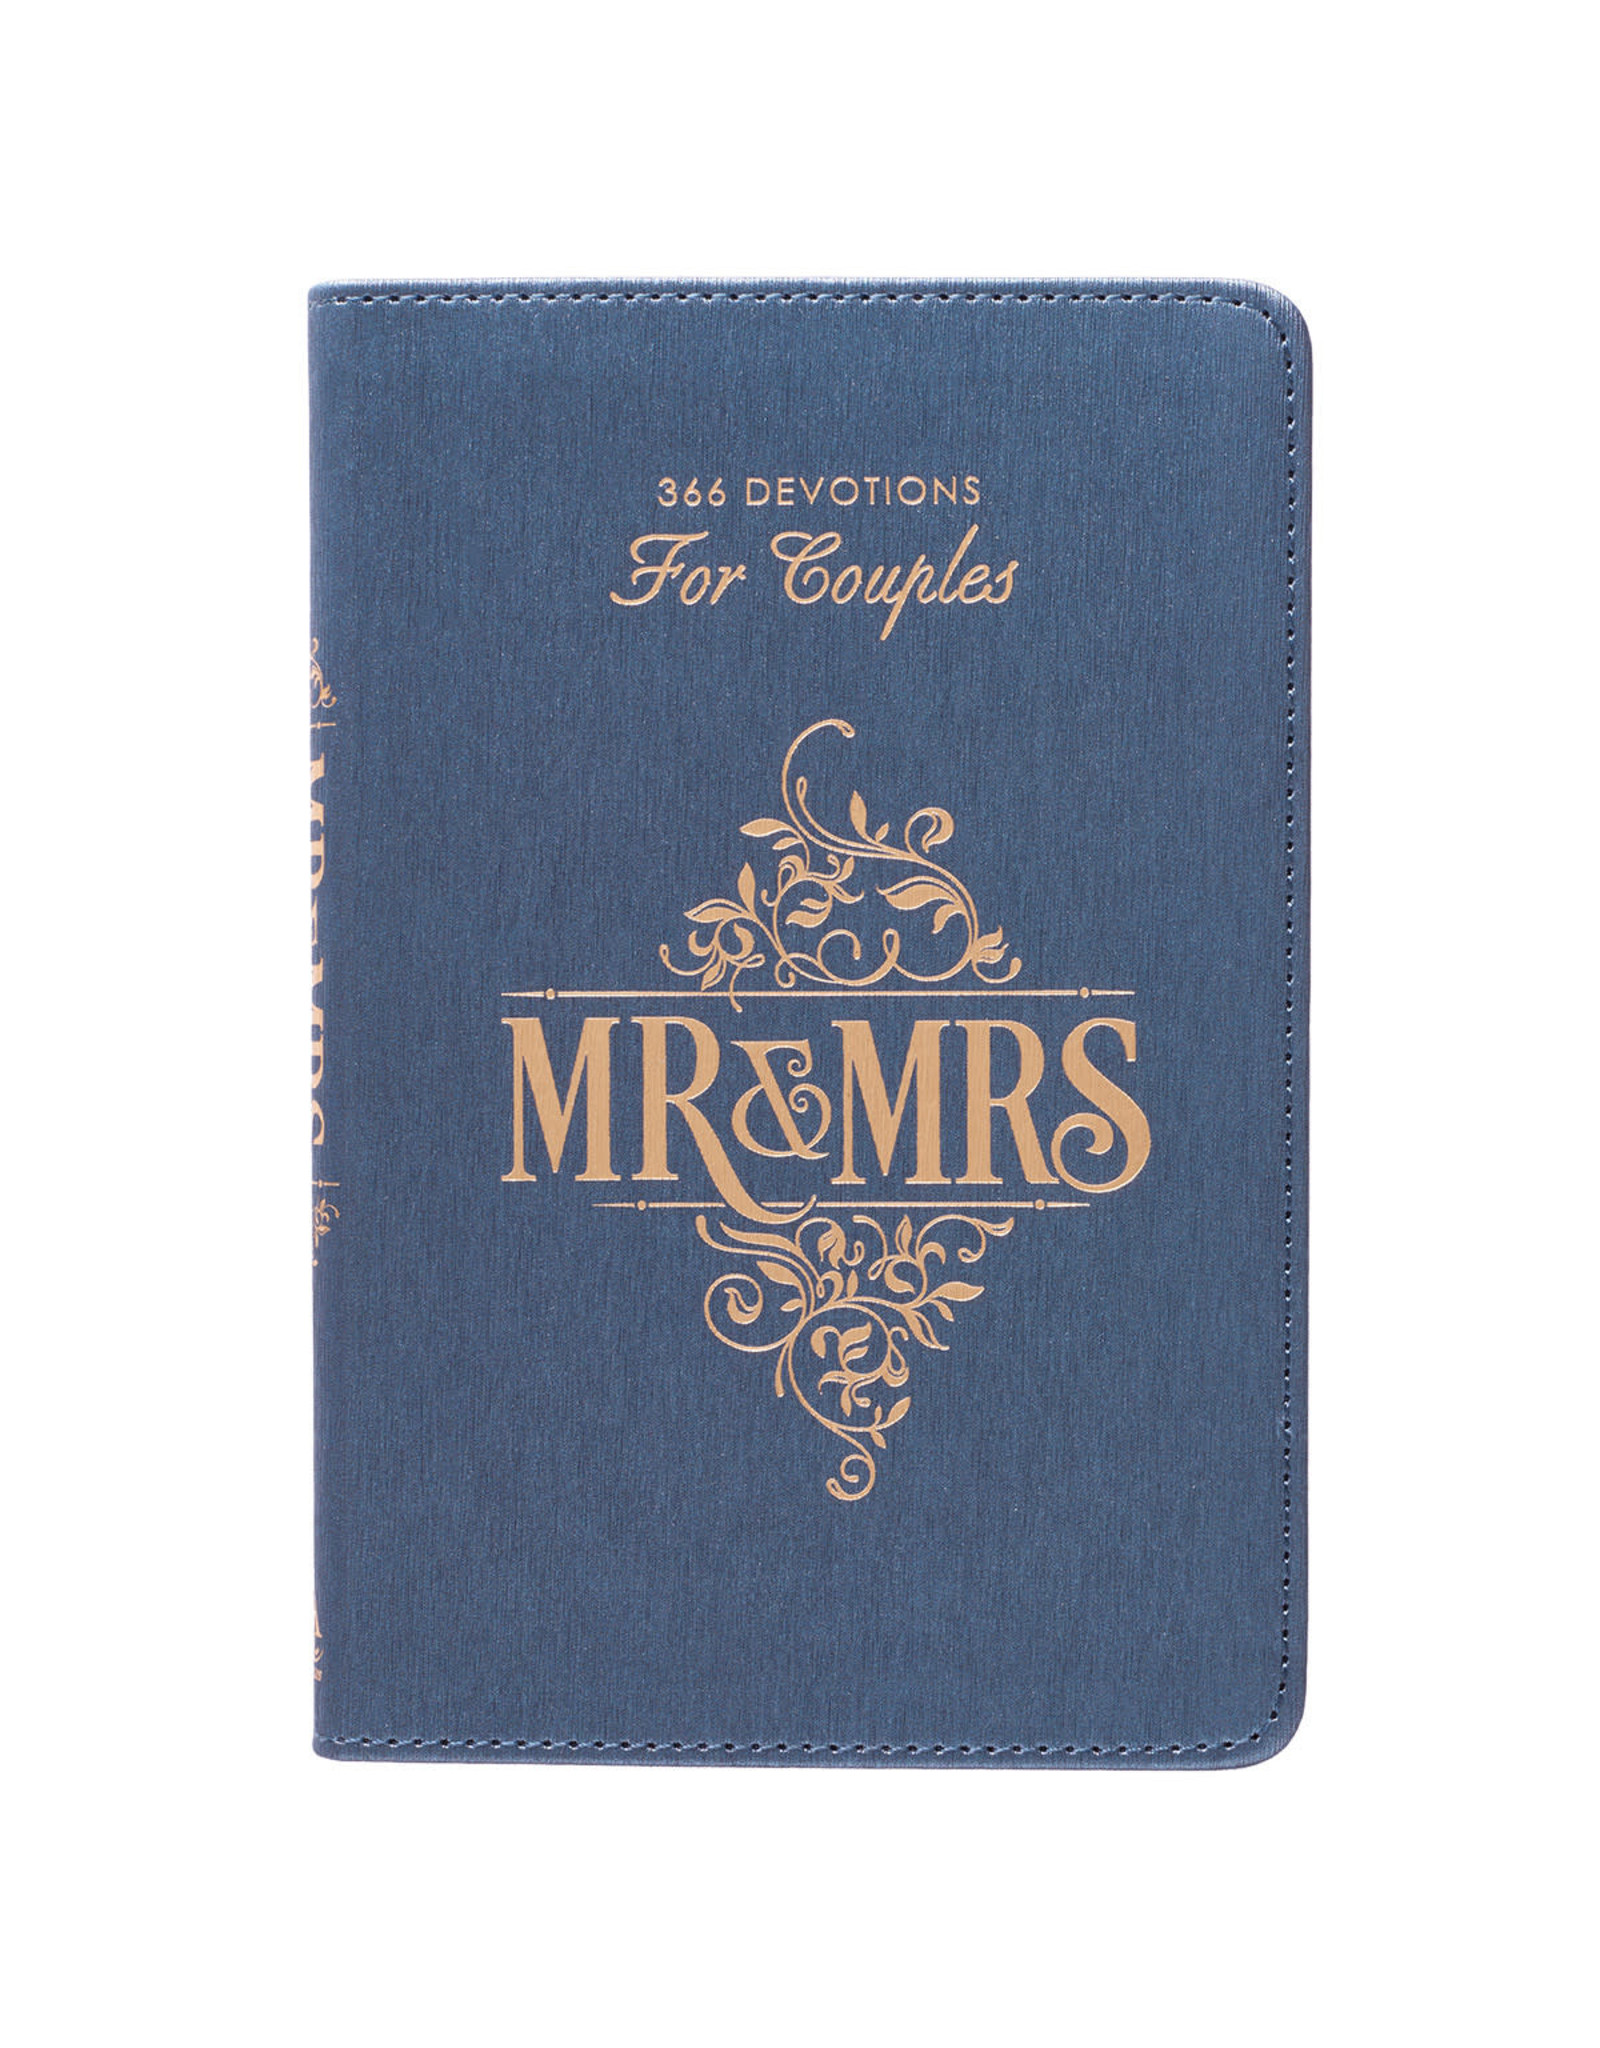 Christian Art Publishers Mr. and Mrs. 366 Devotions for Couples